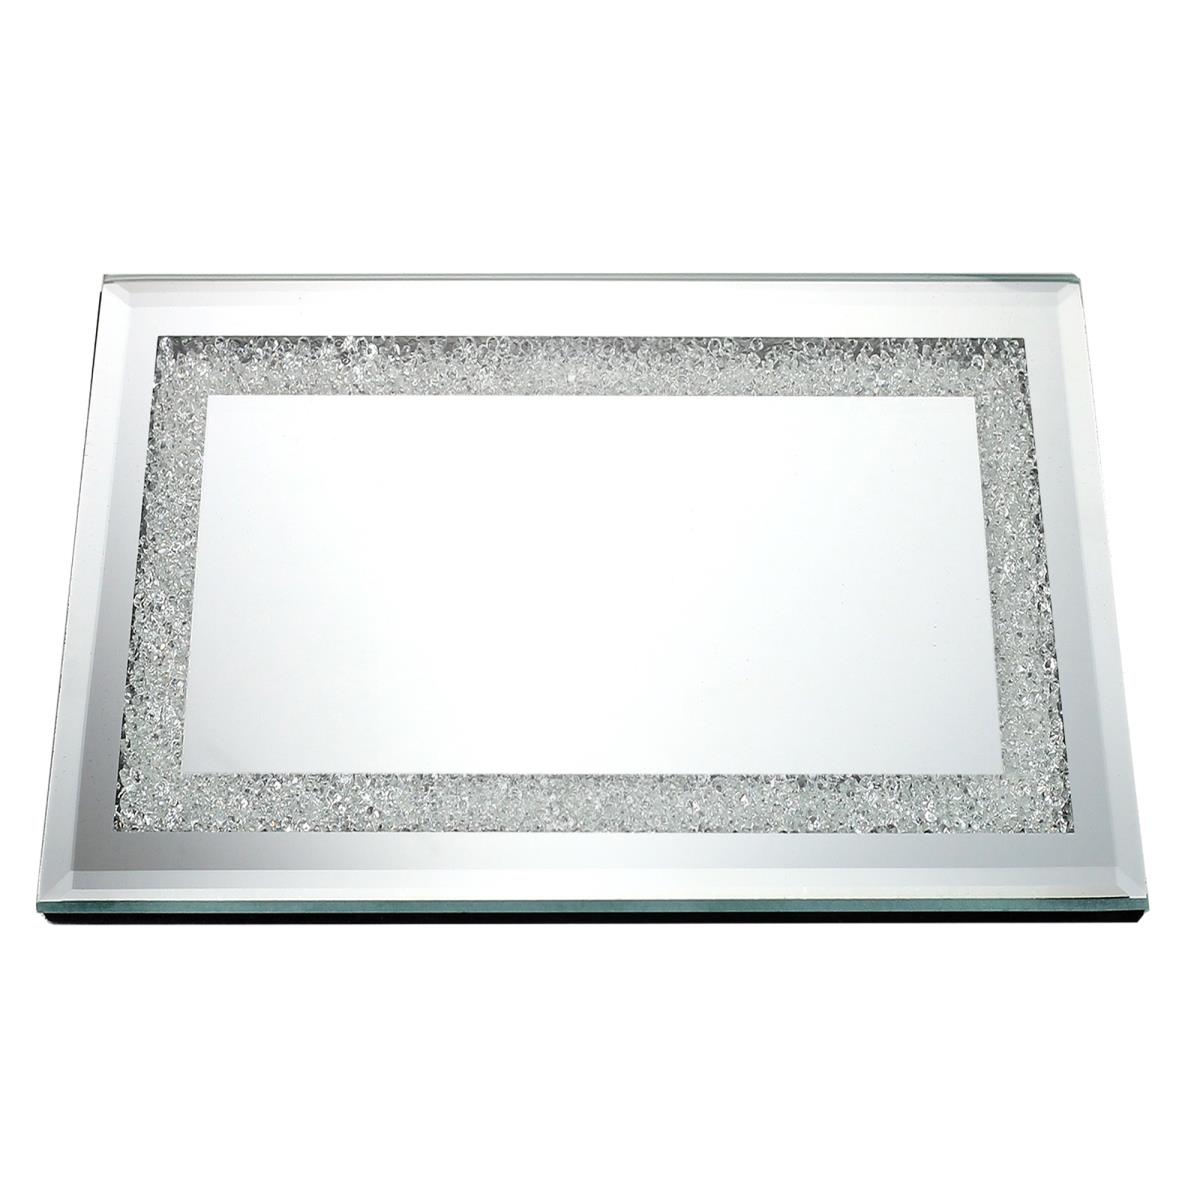 13.8 X 9.8 In. Mirror Tray With Diamonds